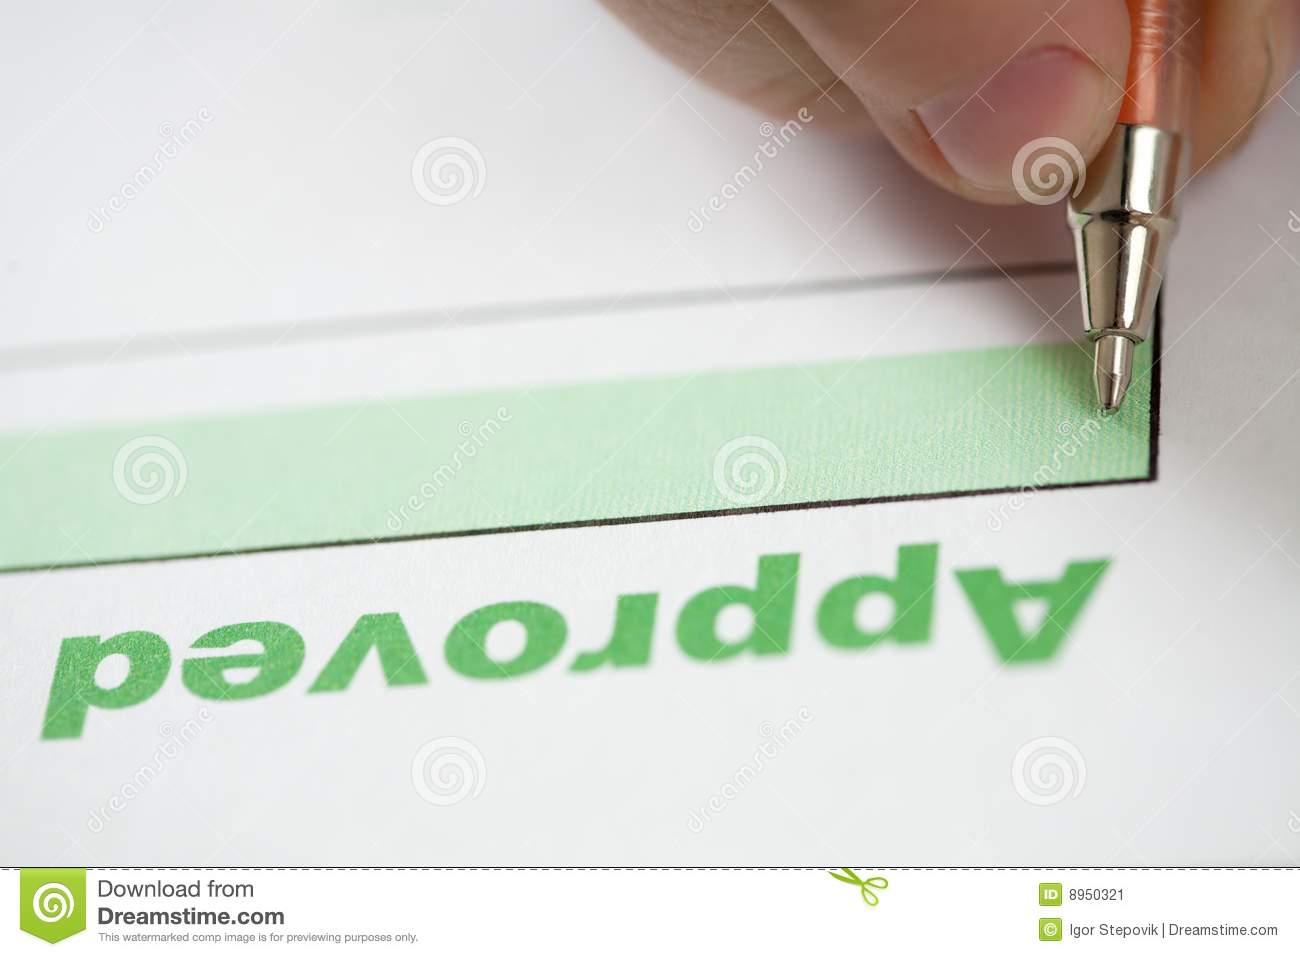 Hand With Pen Signature Approved Document Stock Image   Image  8950321